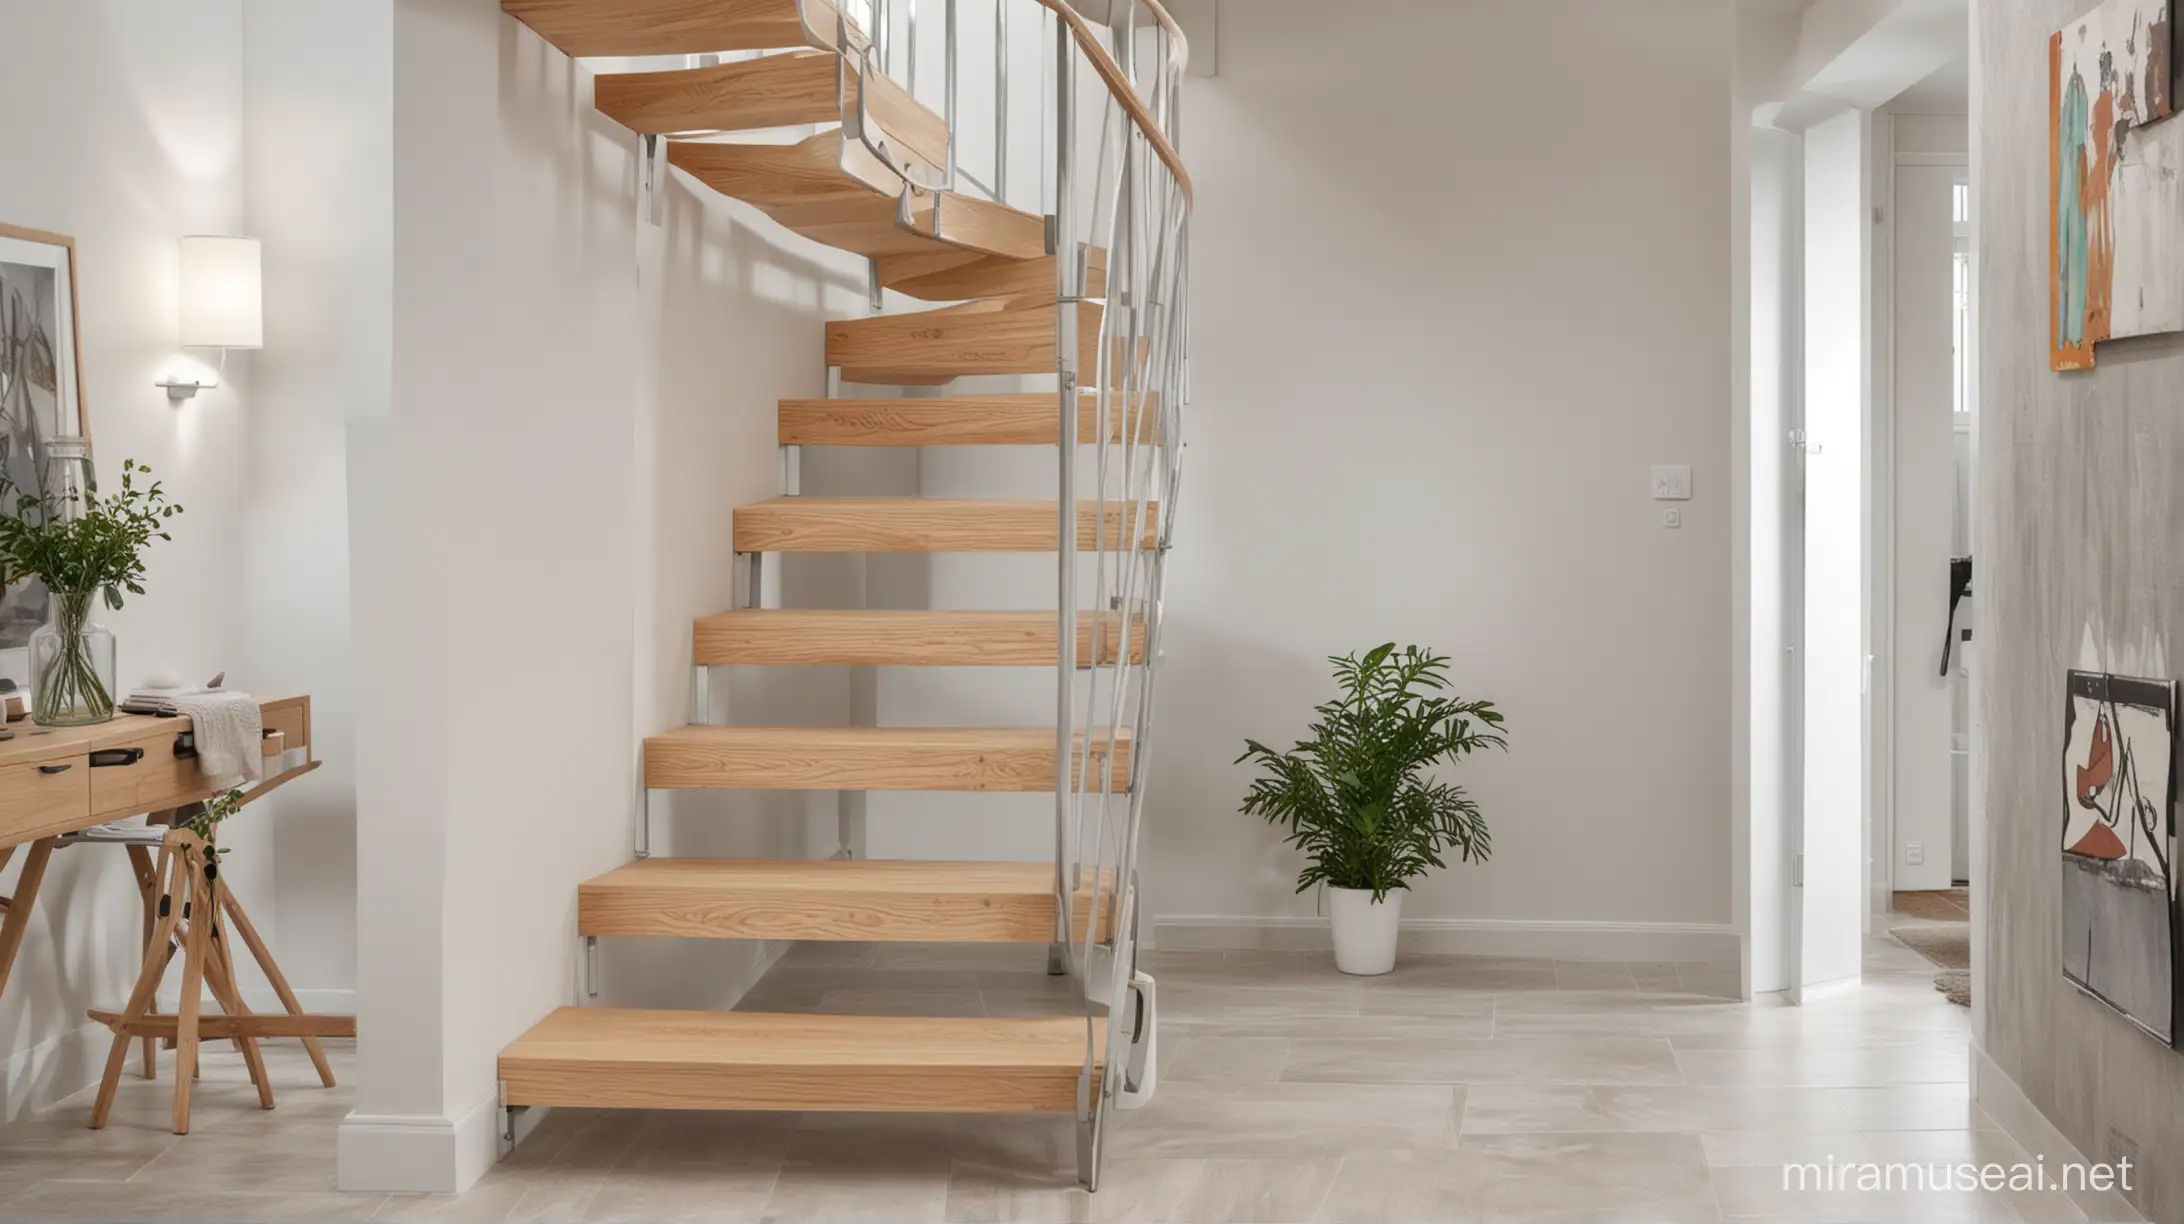 How 3 feet stairs can be accommodated in a minimum space